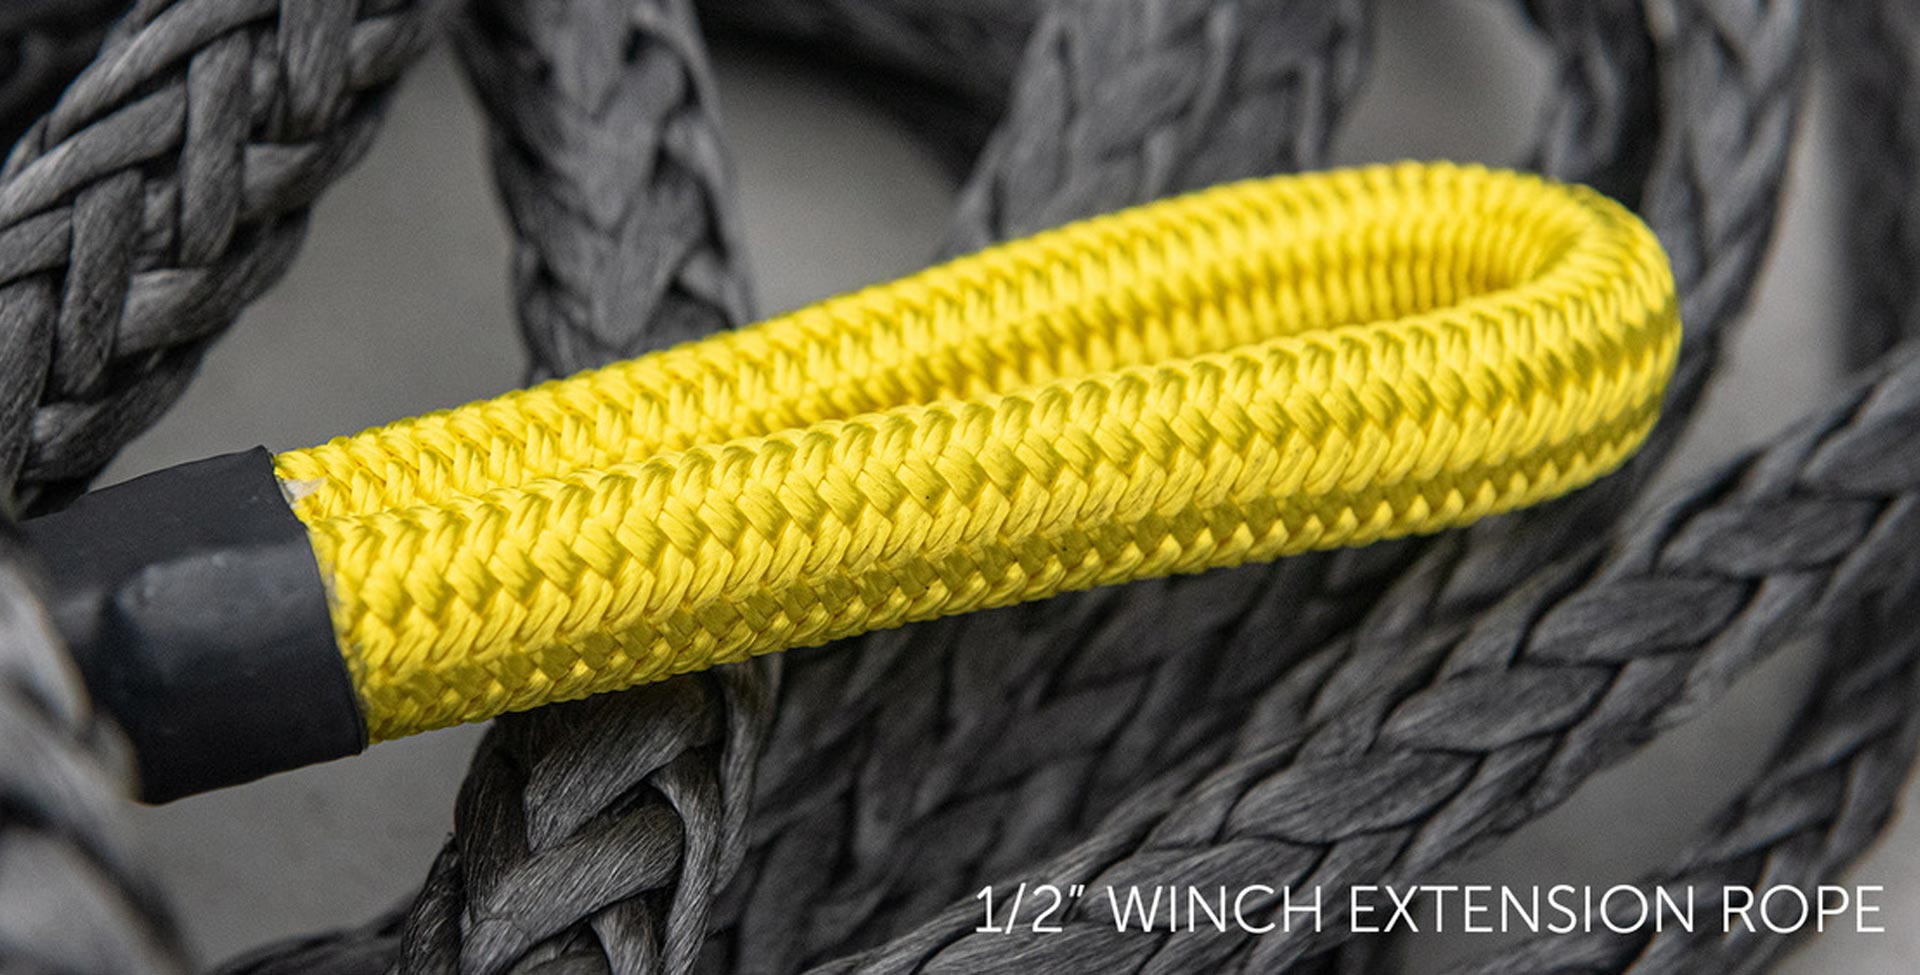 AEV Winch Extension Rope